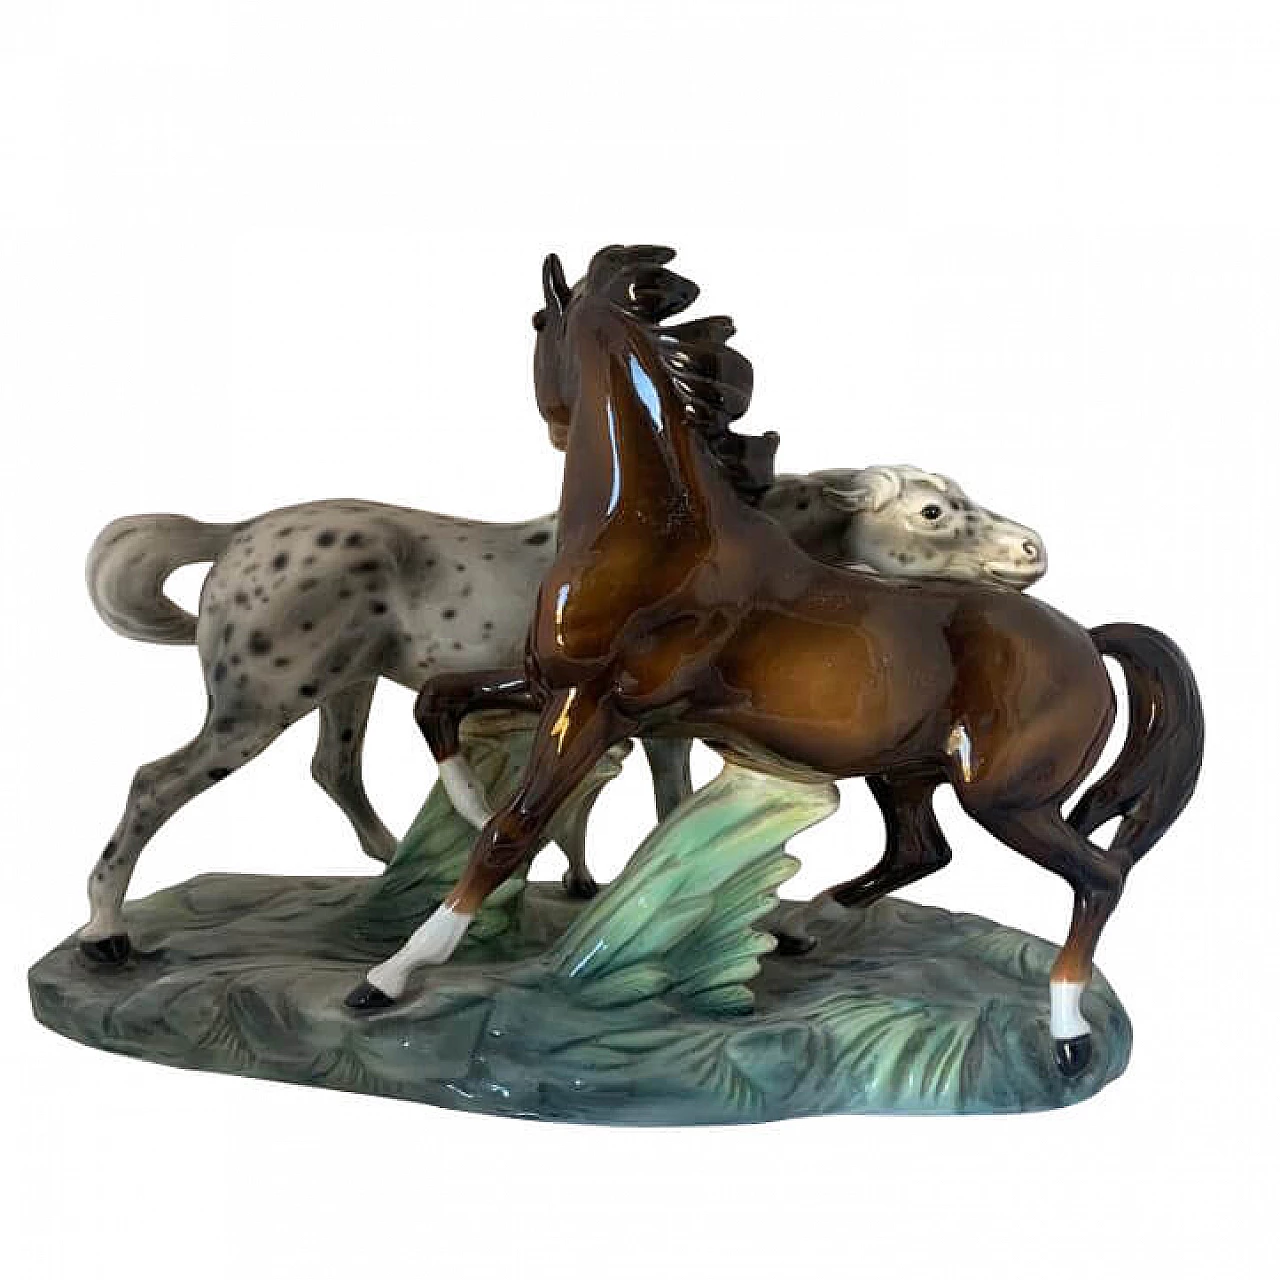 Ceramic sculpture of 2 horses by Ronzan, 1940s 1176587